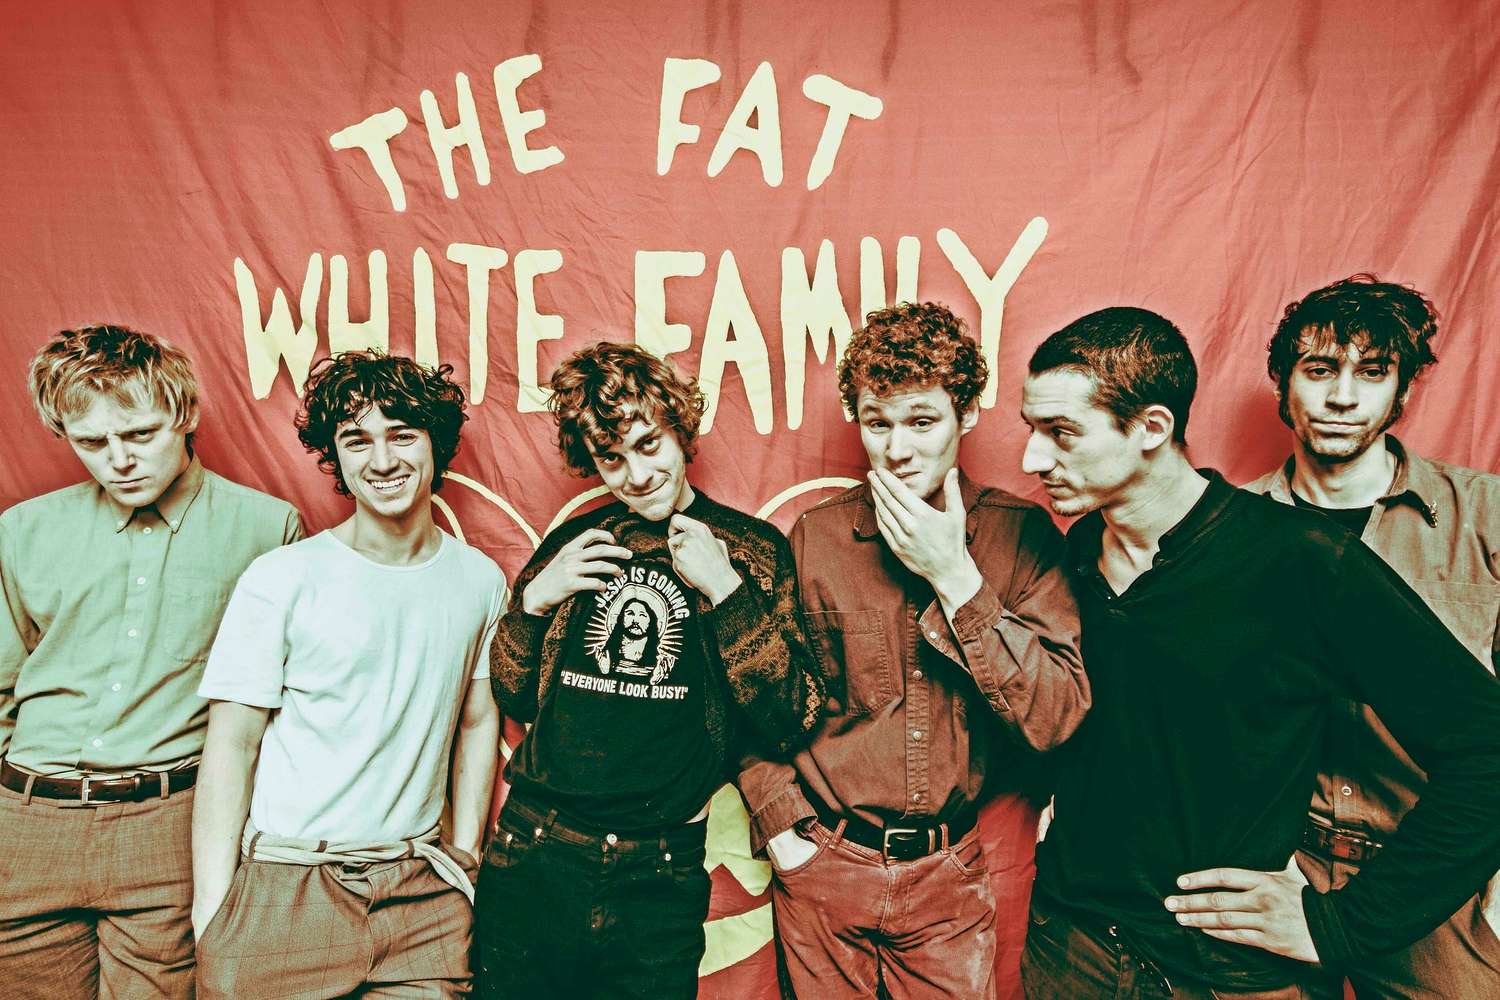 Fat White Family launch their own label